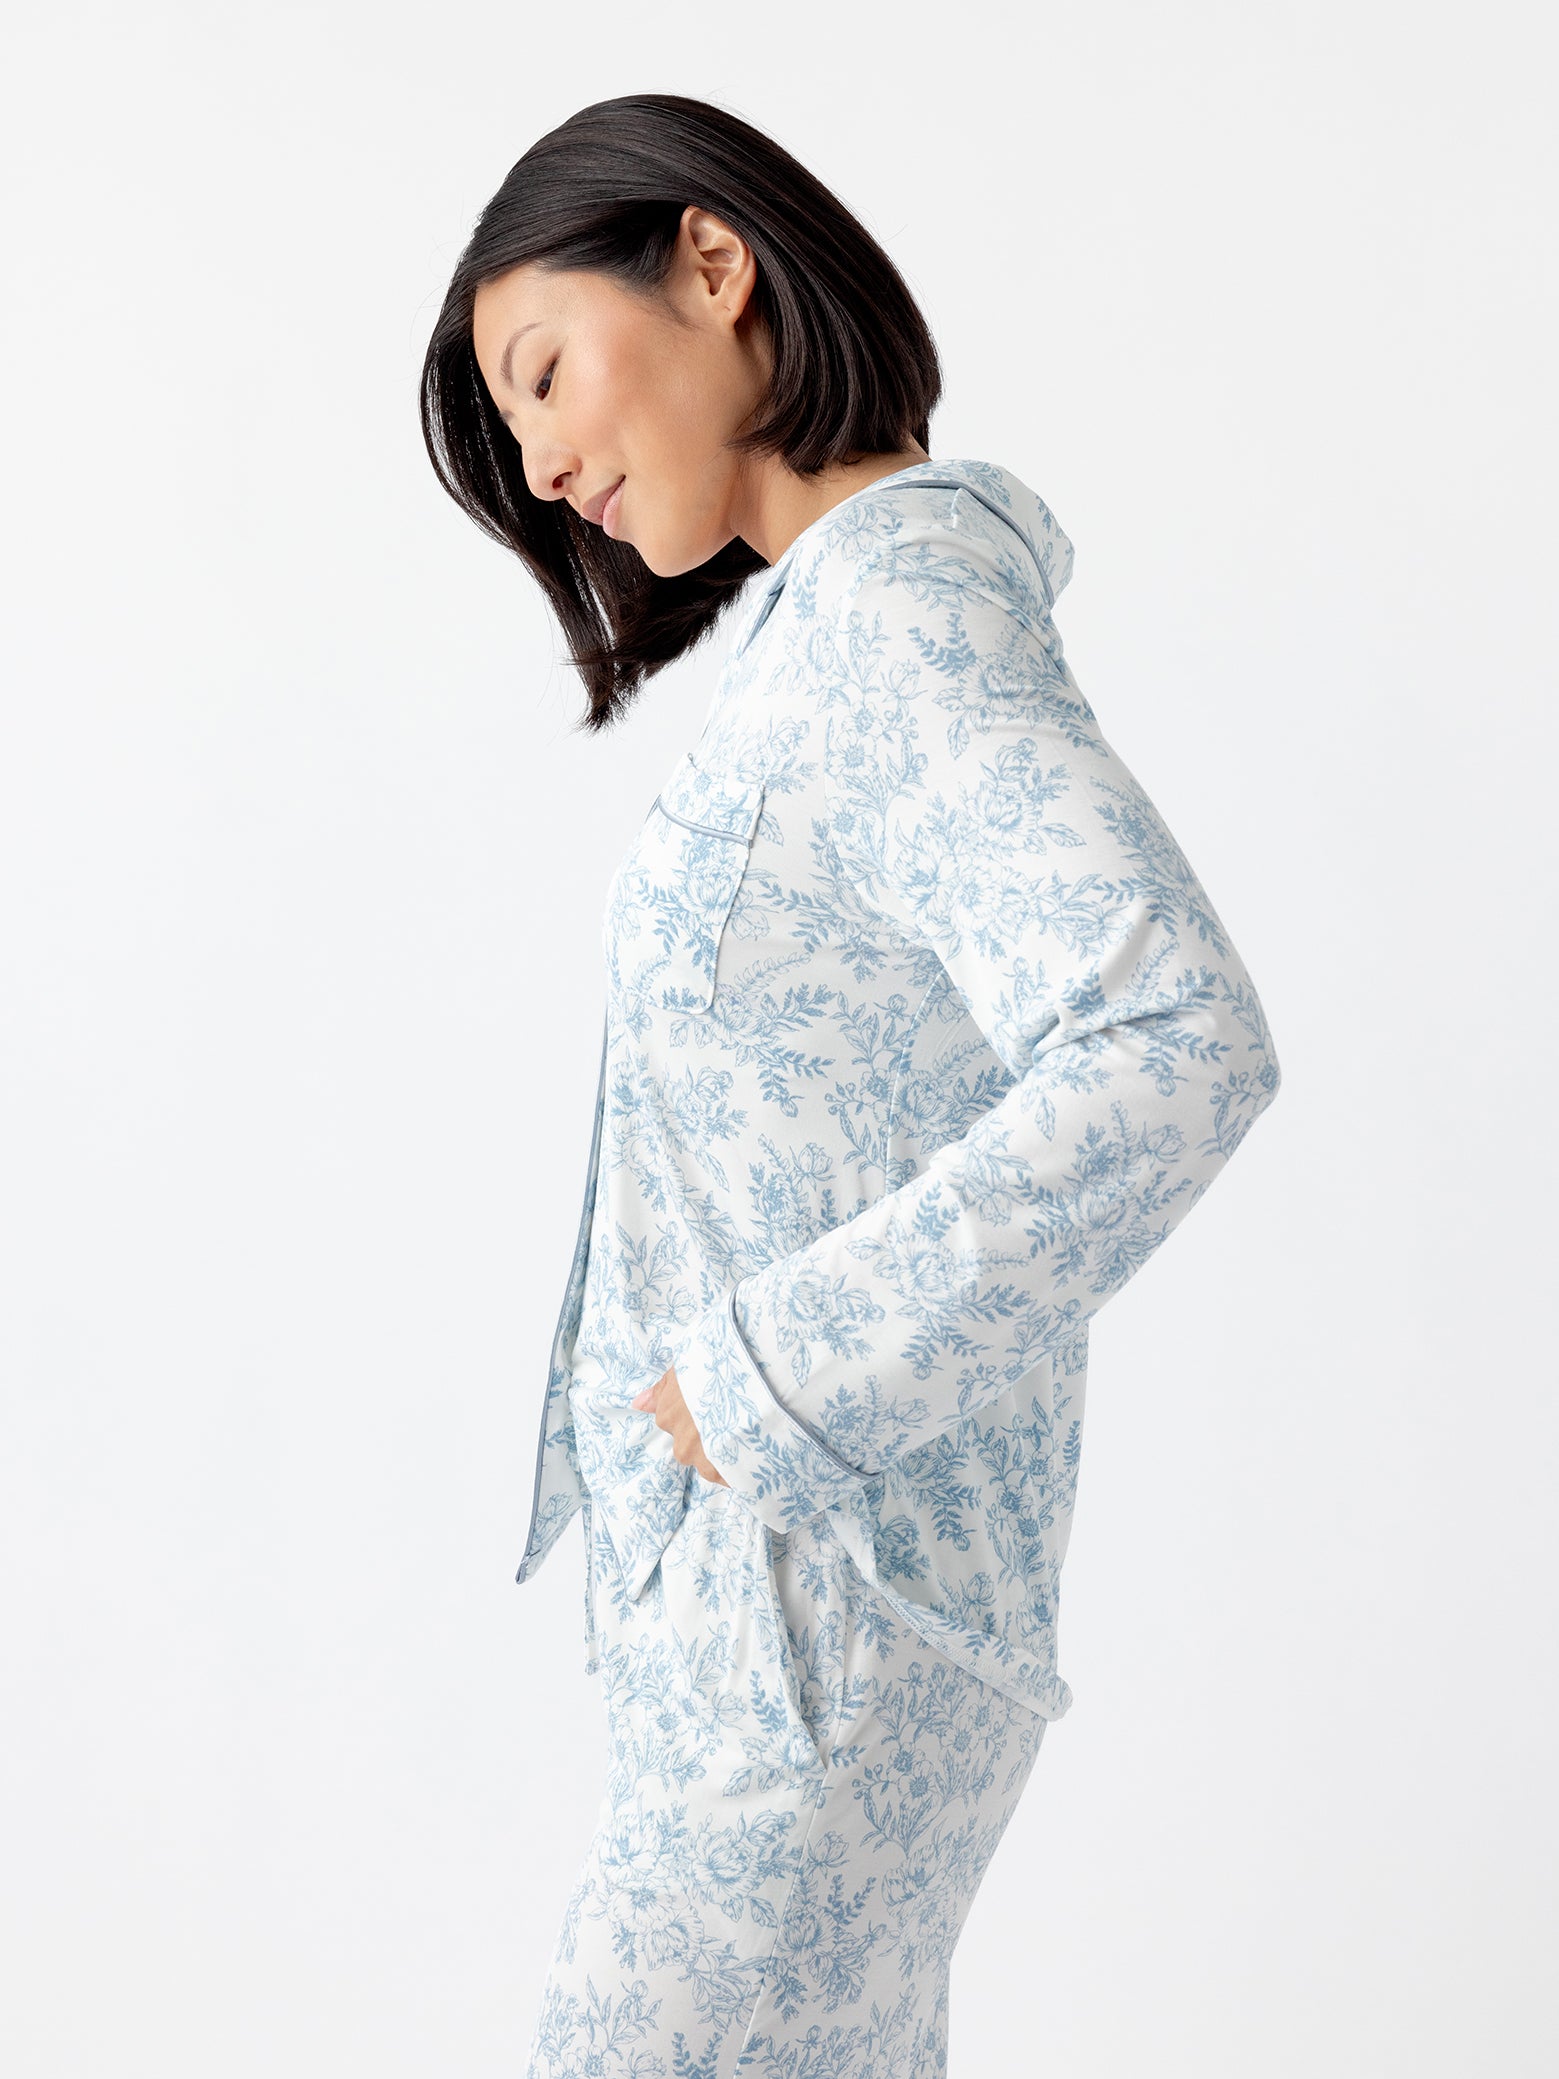 Side view of woman wearing blue toile pajama shirt 